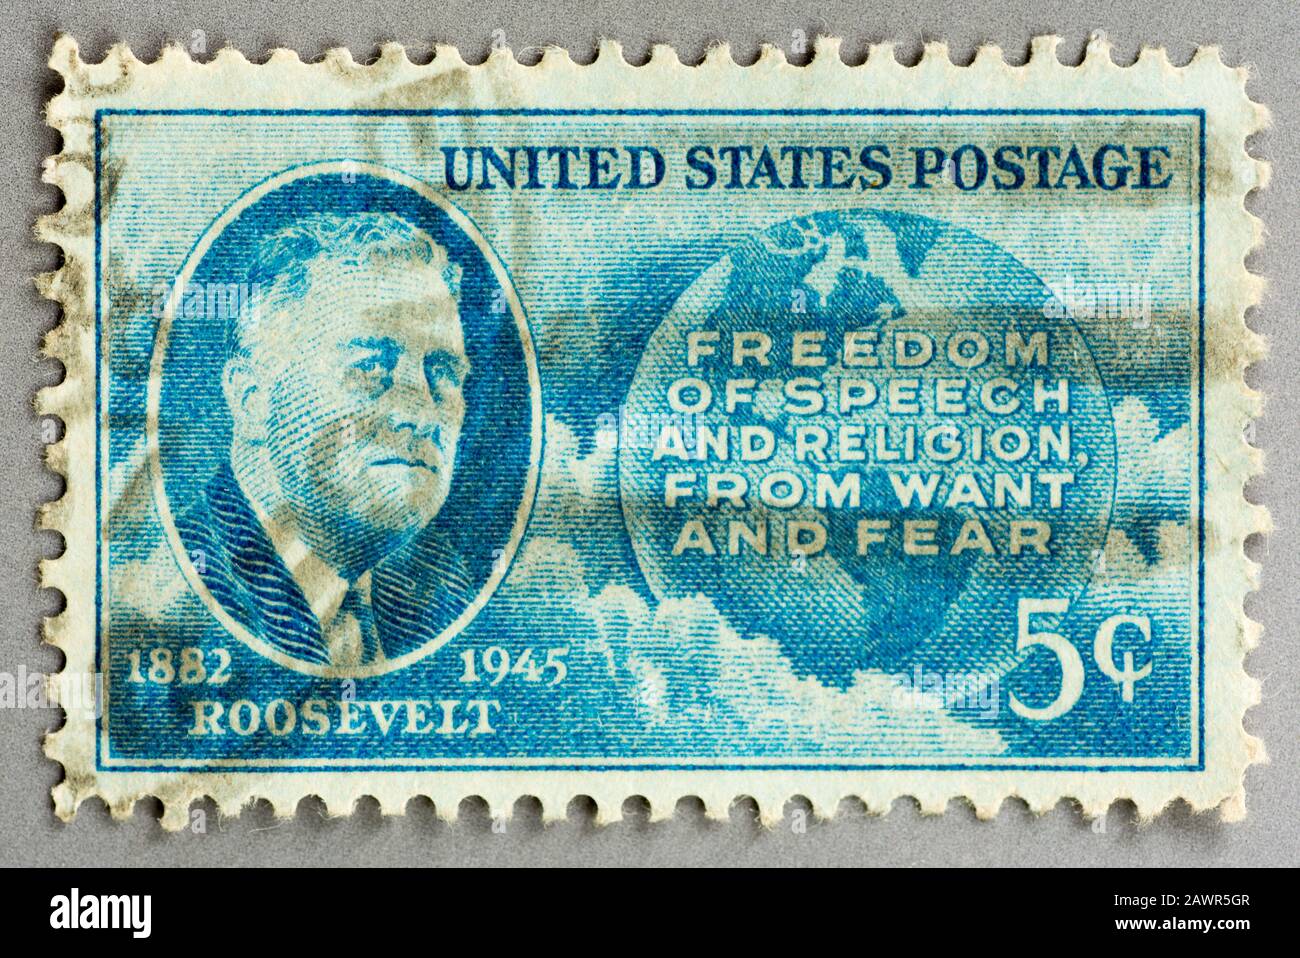 A  US Postage stamp commemorating President Franklin D Roosevelt 1882-1945 with his Four Freedoms quote. Stock Photo